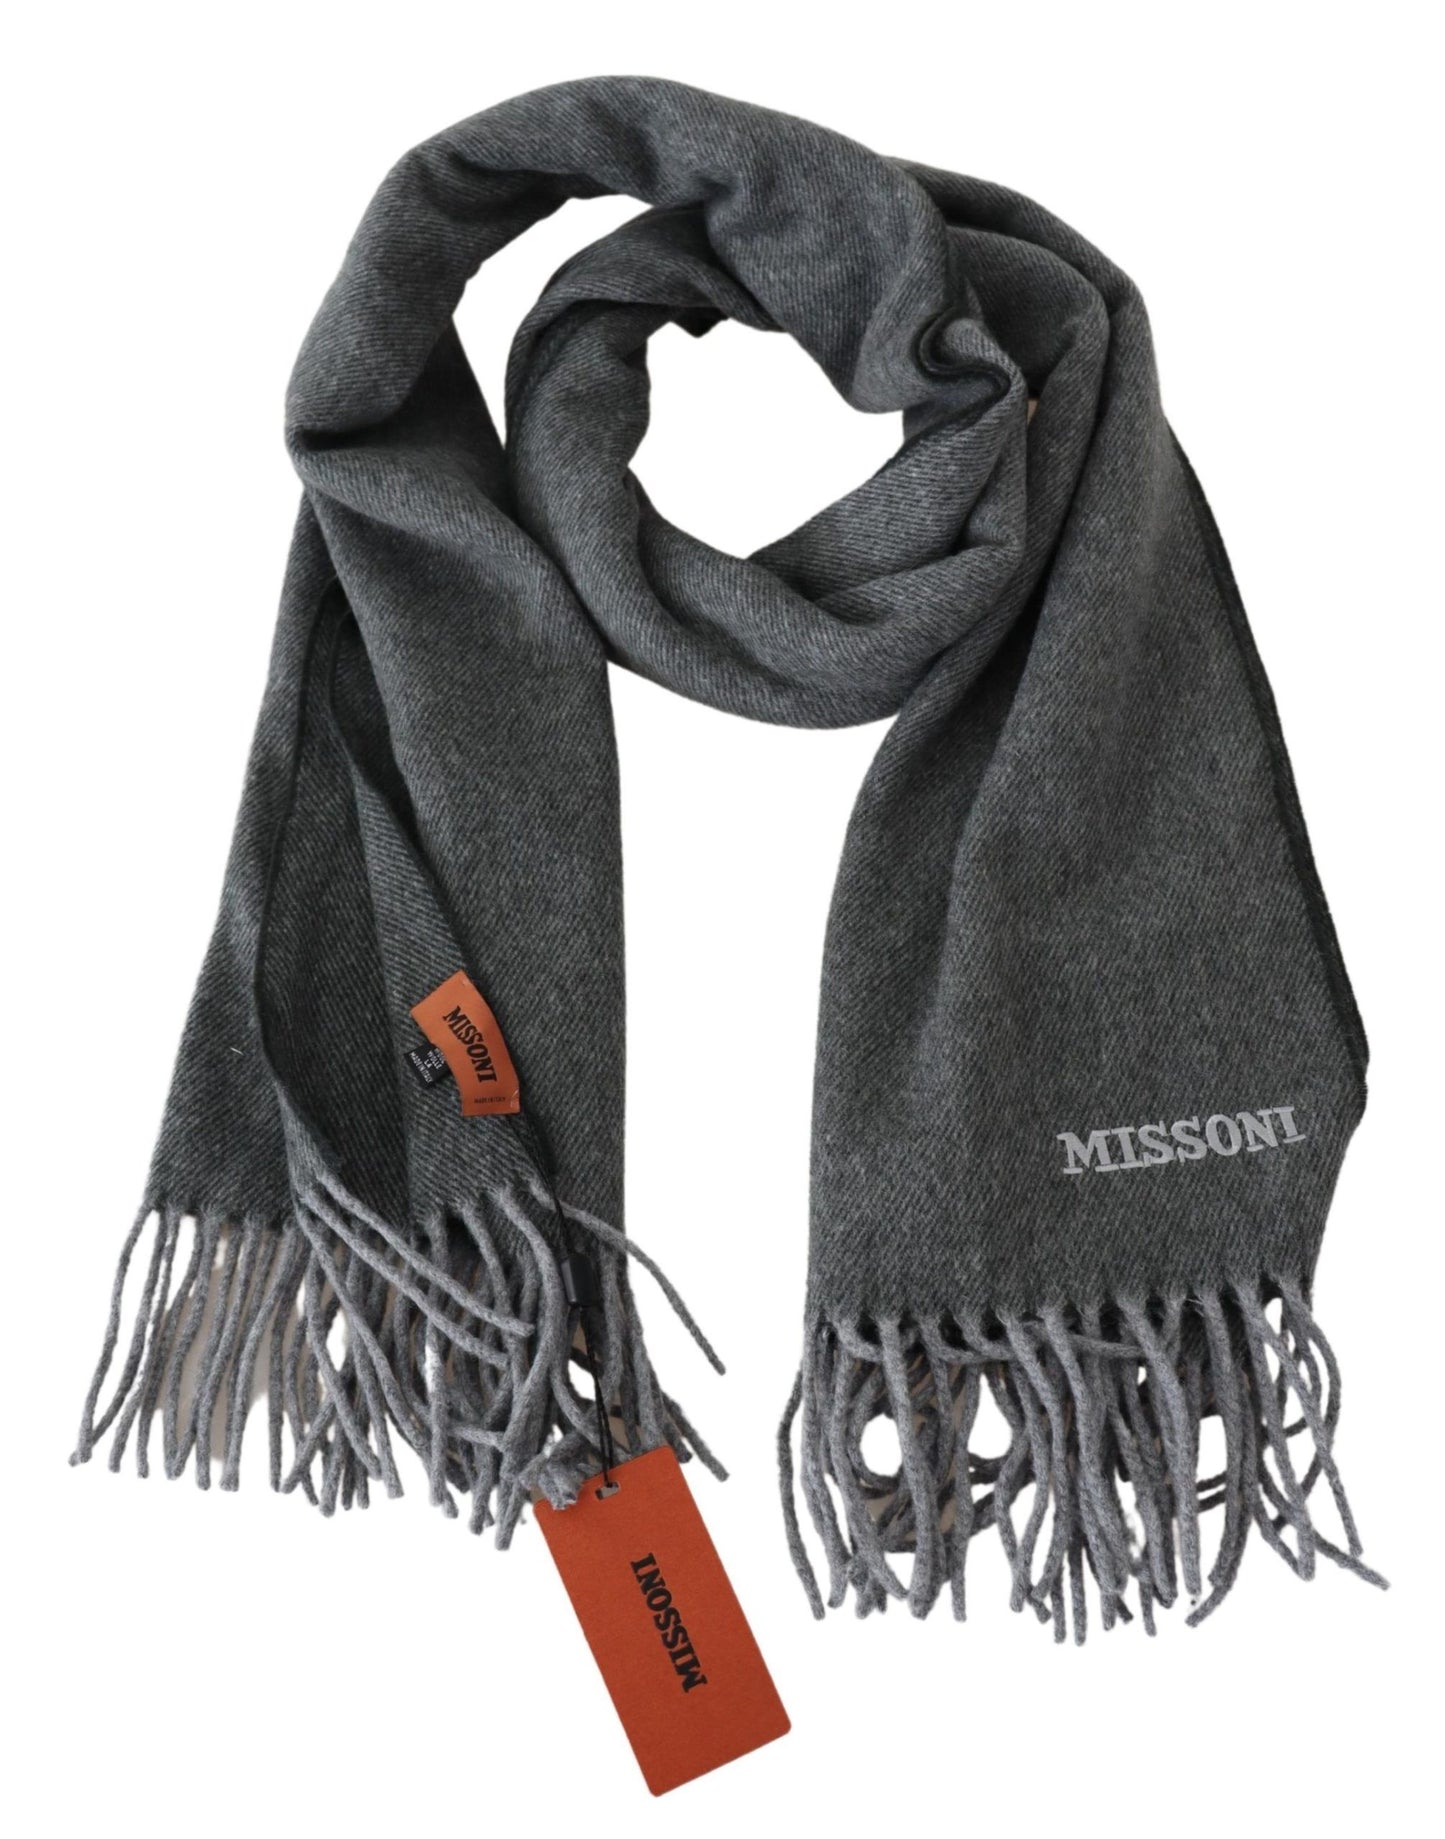 Elegant Gray Wool Unisex Scarf with Logo Embroidery